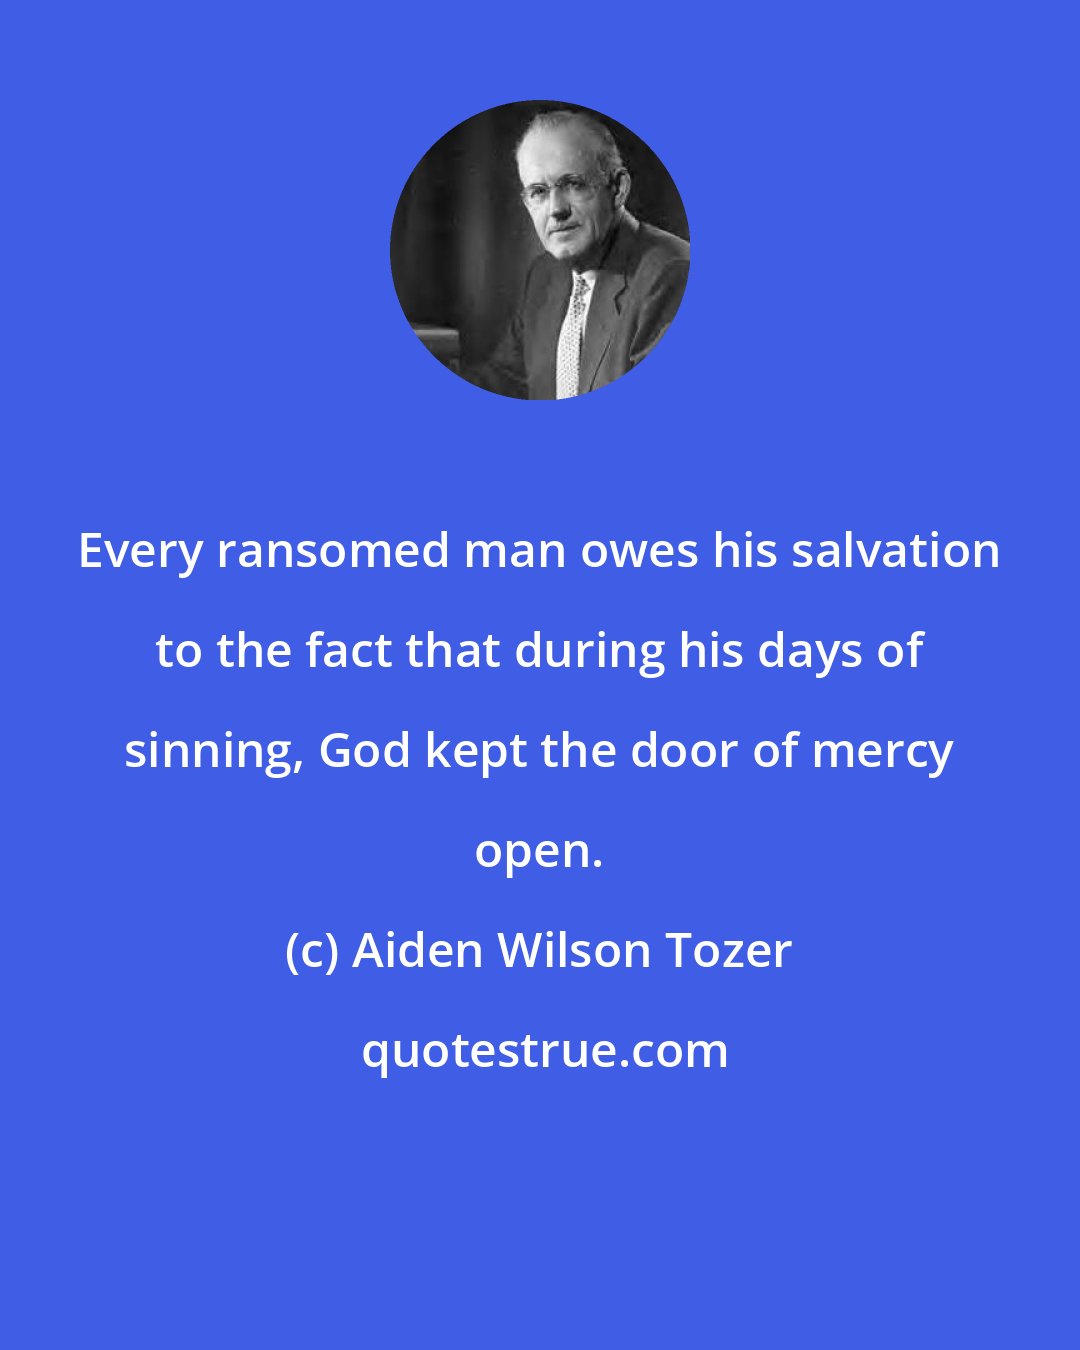 Aiden Wilson Tozer: Every ransomed man owes his salvation to the fact that during his days of sinning, God kept the door of mercy open.